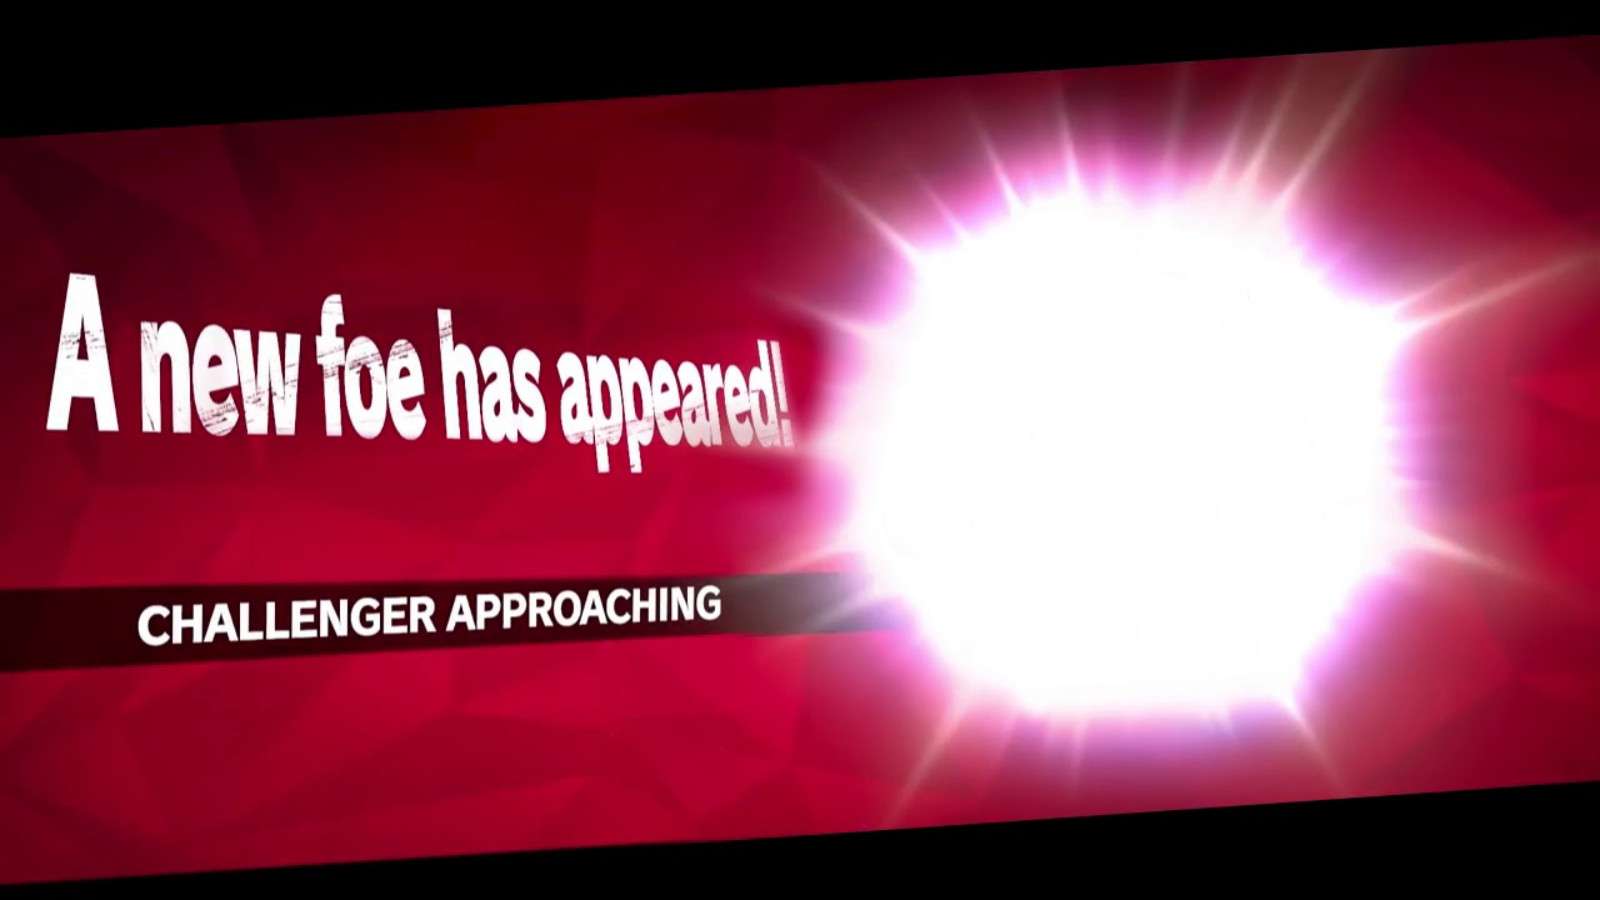 Smash Ultimate challenger approaching